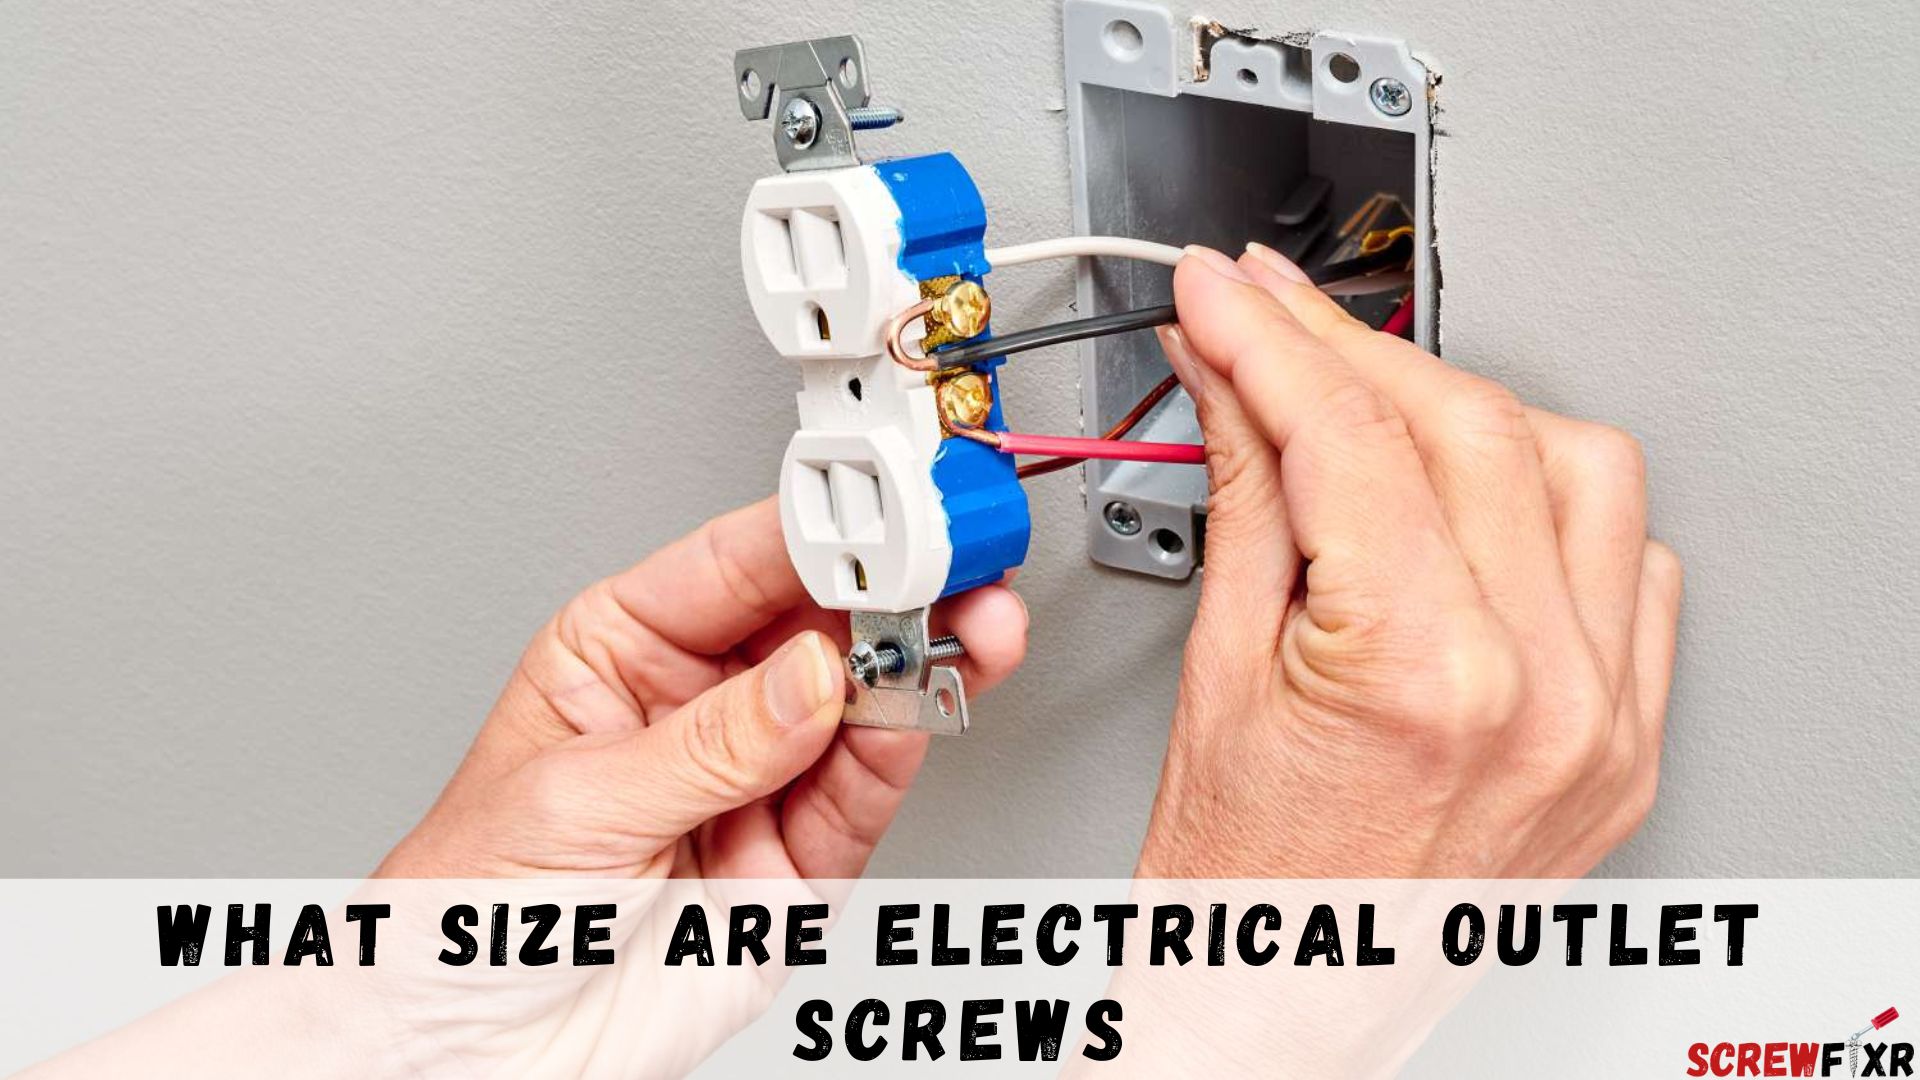 What Size Are Electrical Outlet Screws